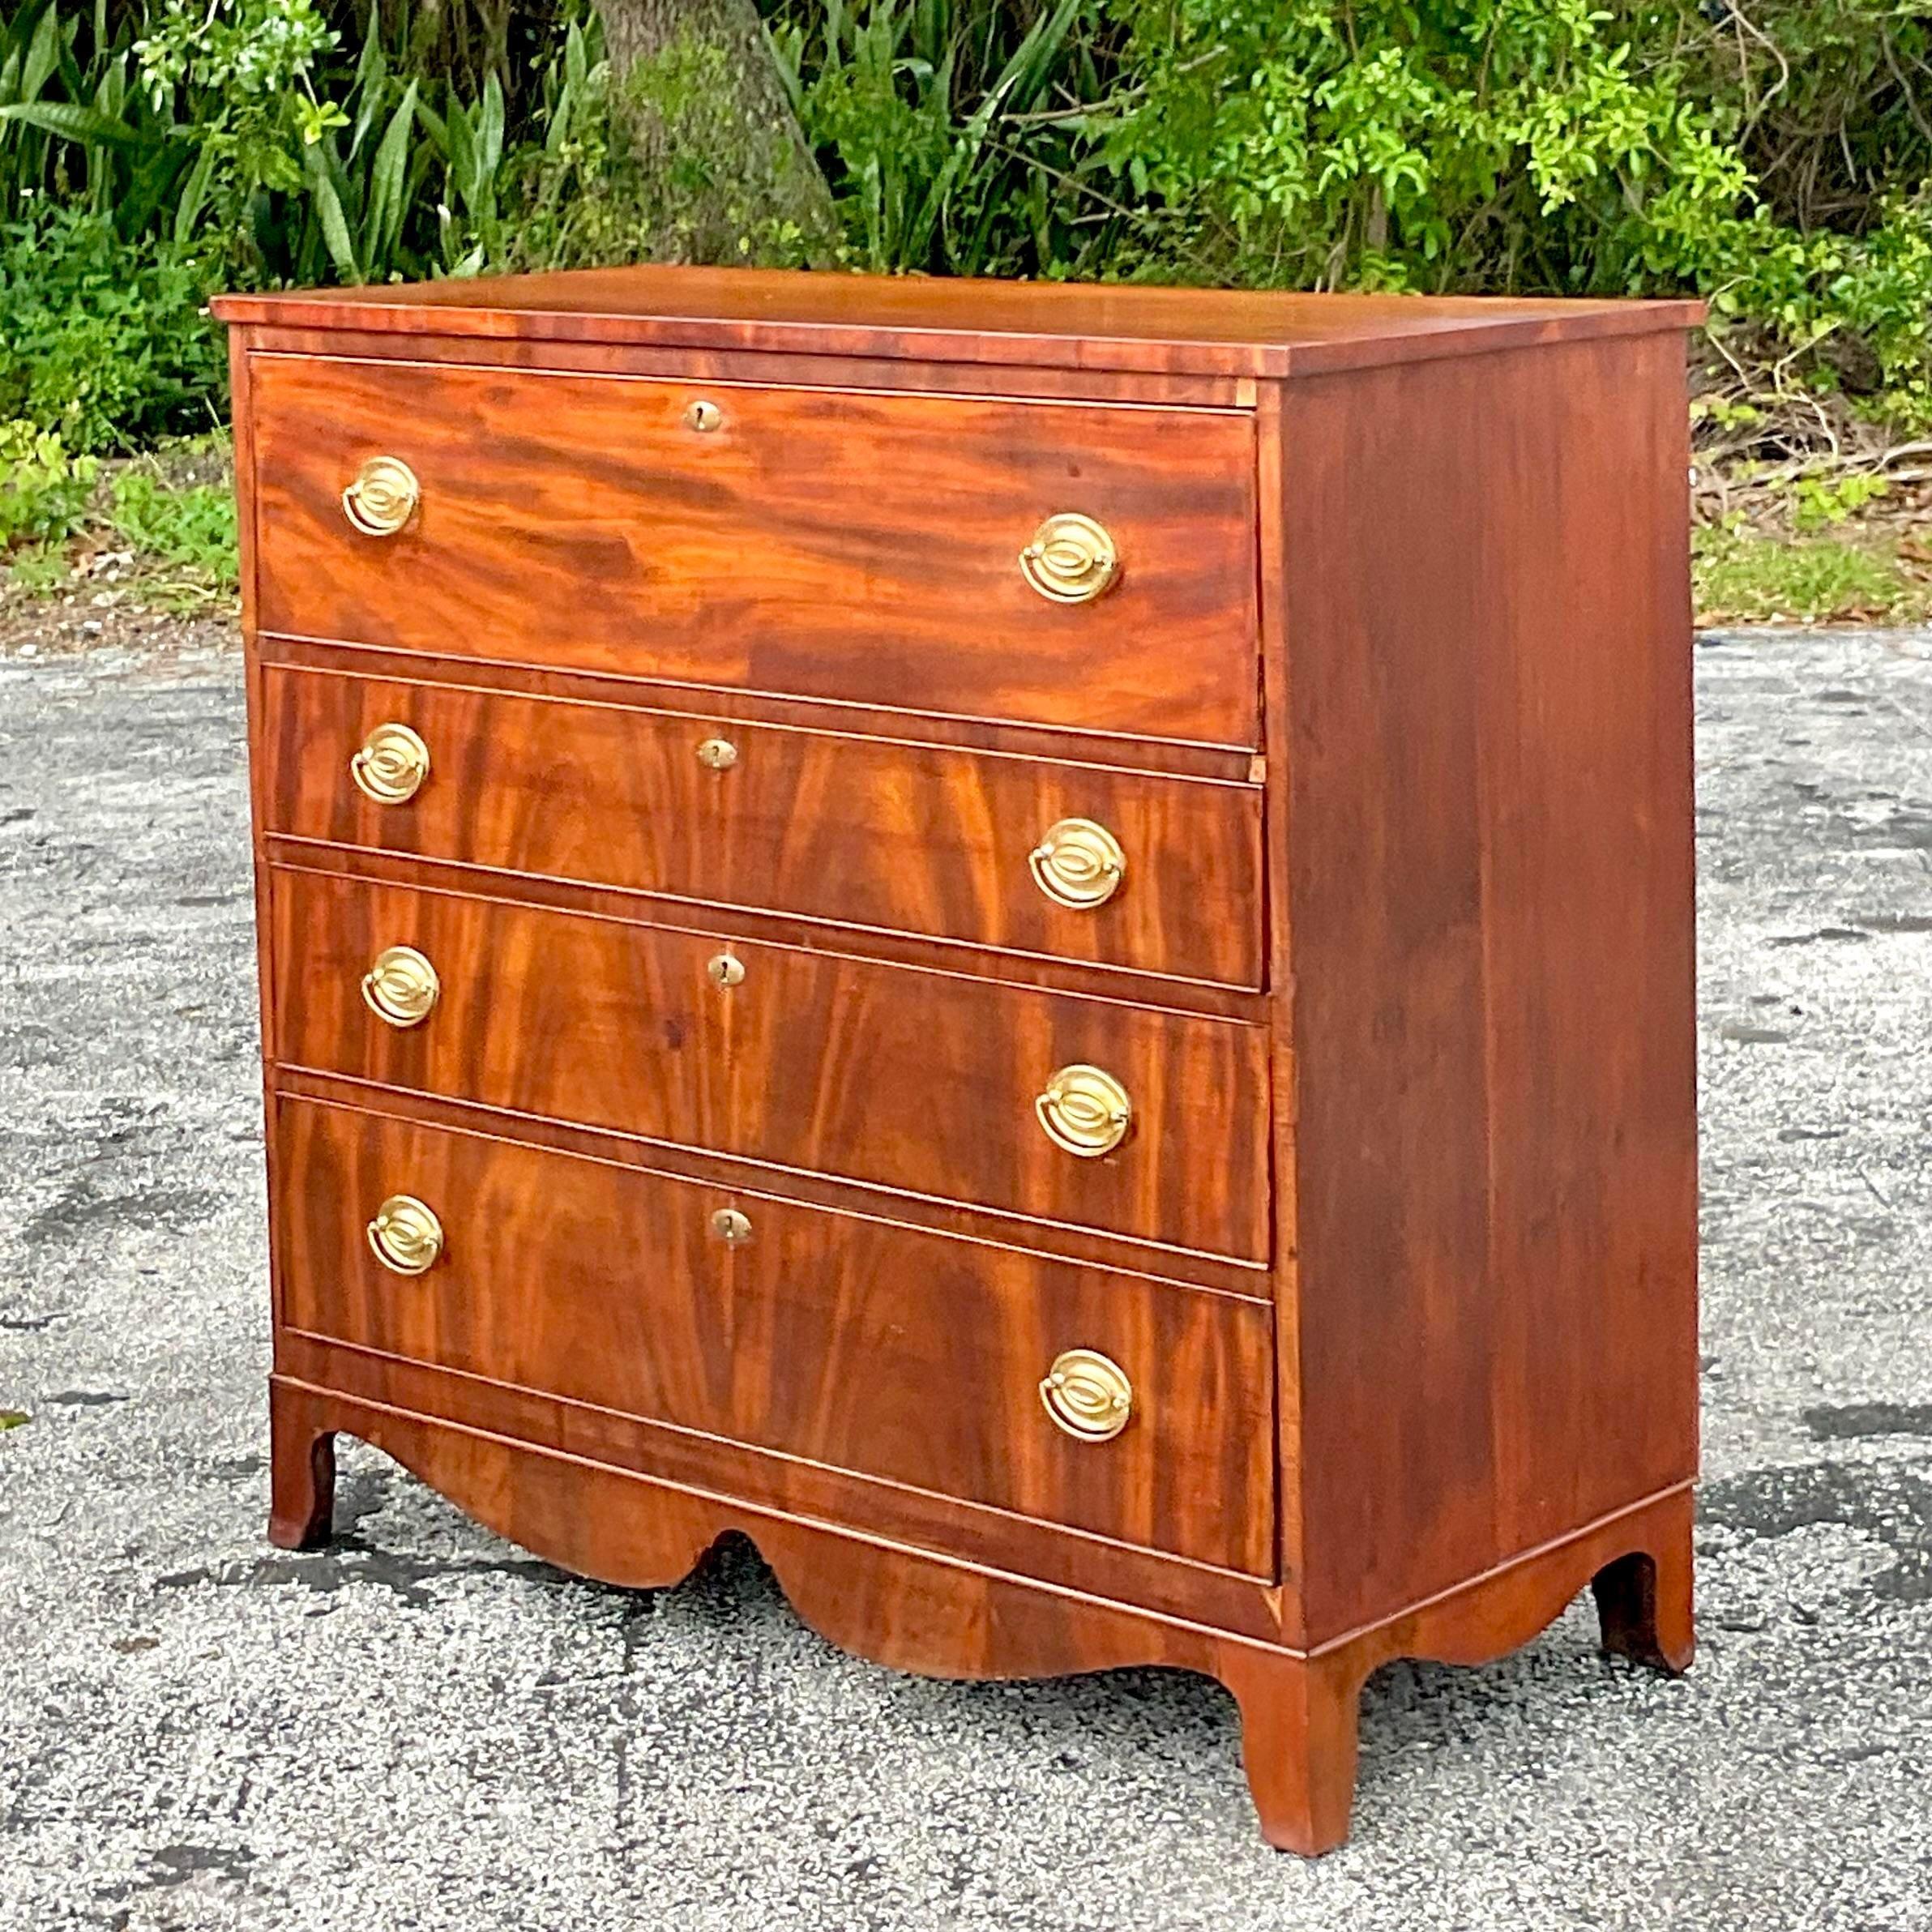 Mid 20th Century Vintage Regency Flame Mahogany Chest of Drawers In Good Condition For Sale In west palm beach, FL